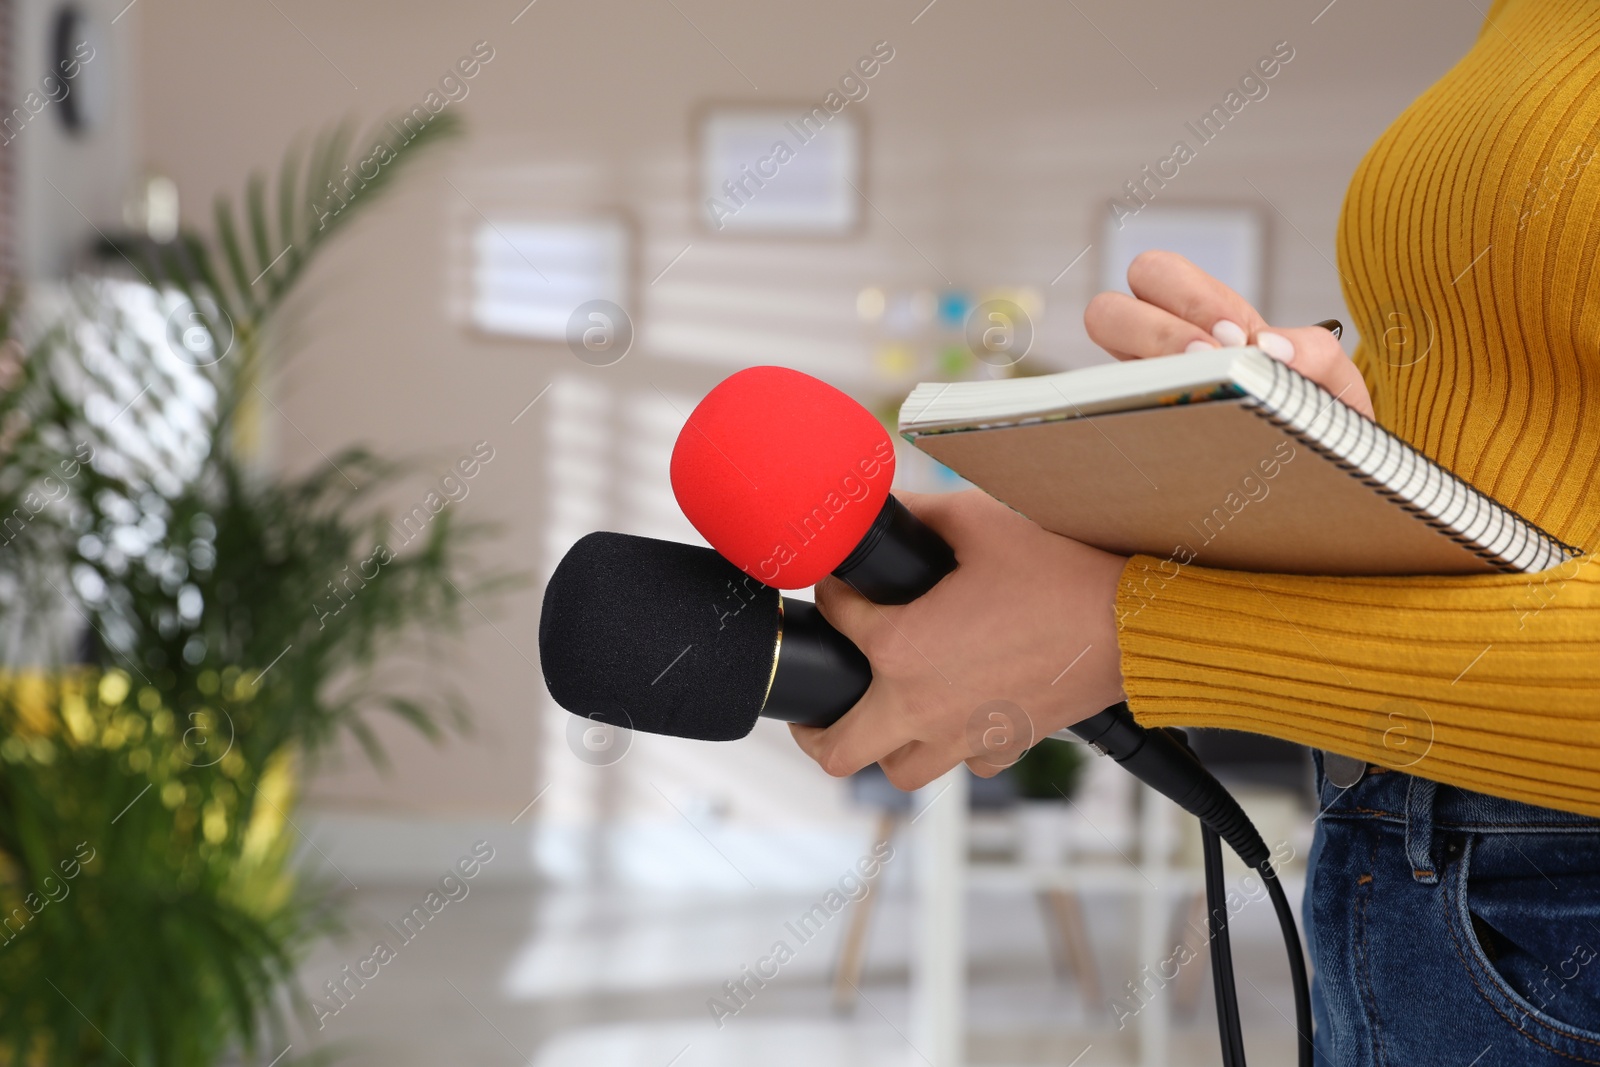 Photo of Professional journalist with microphones taking notes indoors, closeup